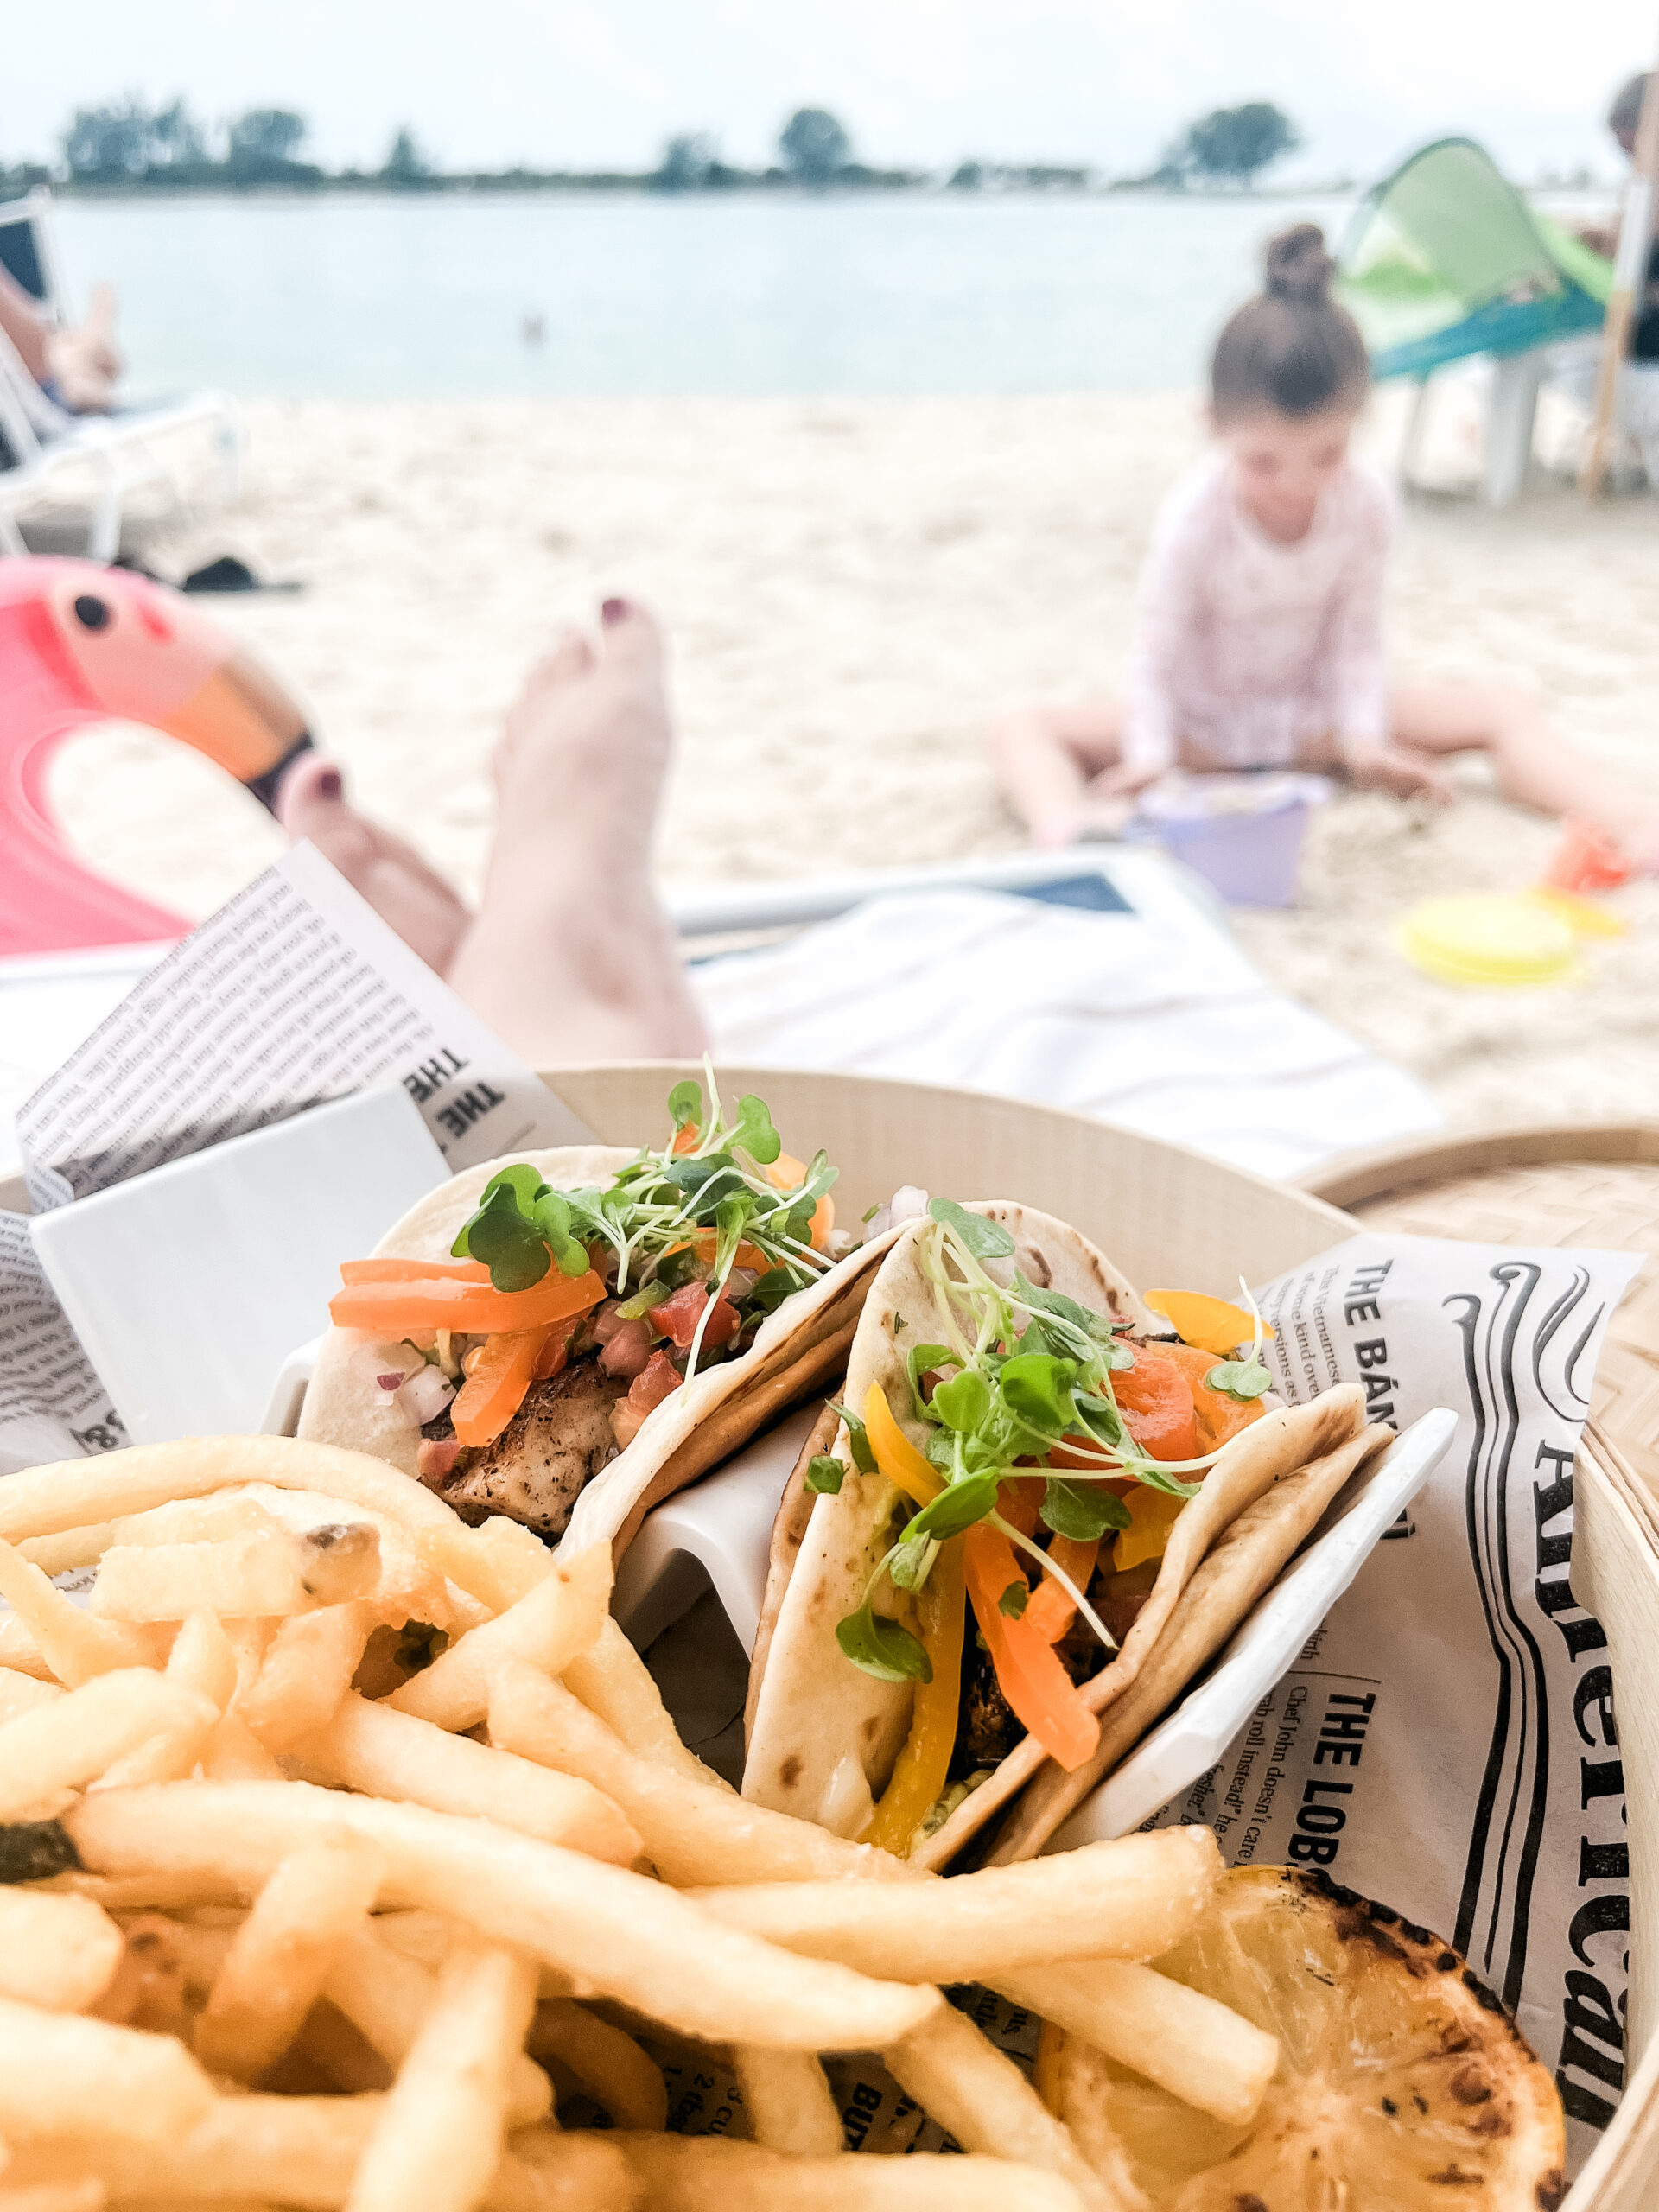 plated meal featuring fish tacos and french fries from Eskape Beach Bar and Grill at JW Marriott Clearwater Beach. Enjoying meal beachside as daughter plays in the sand.